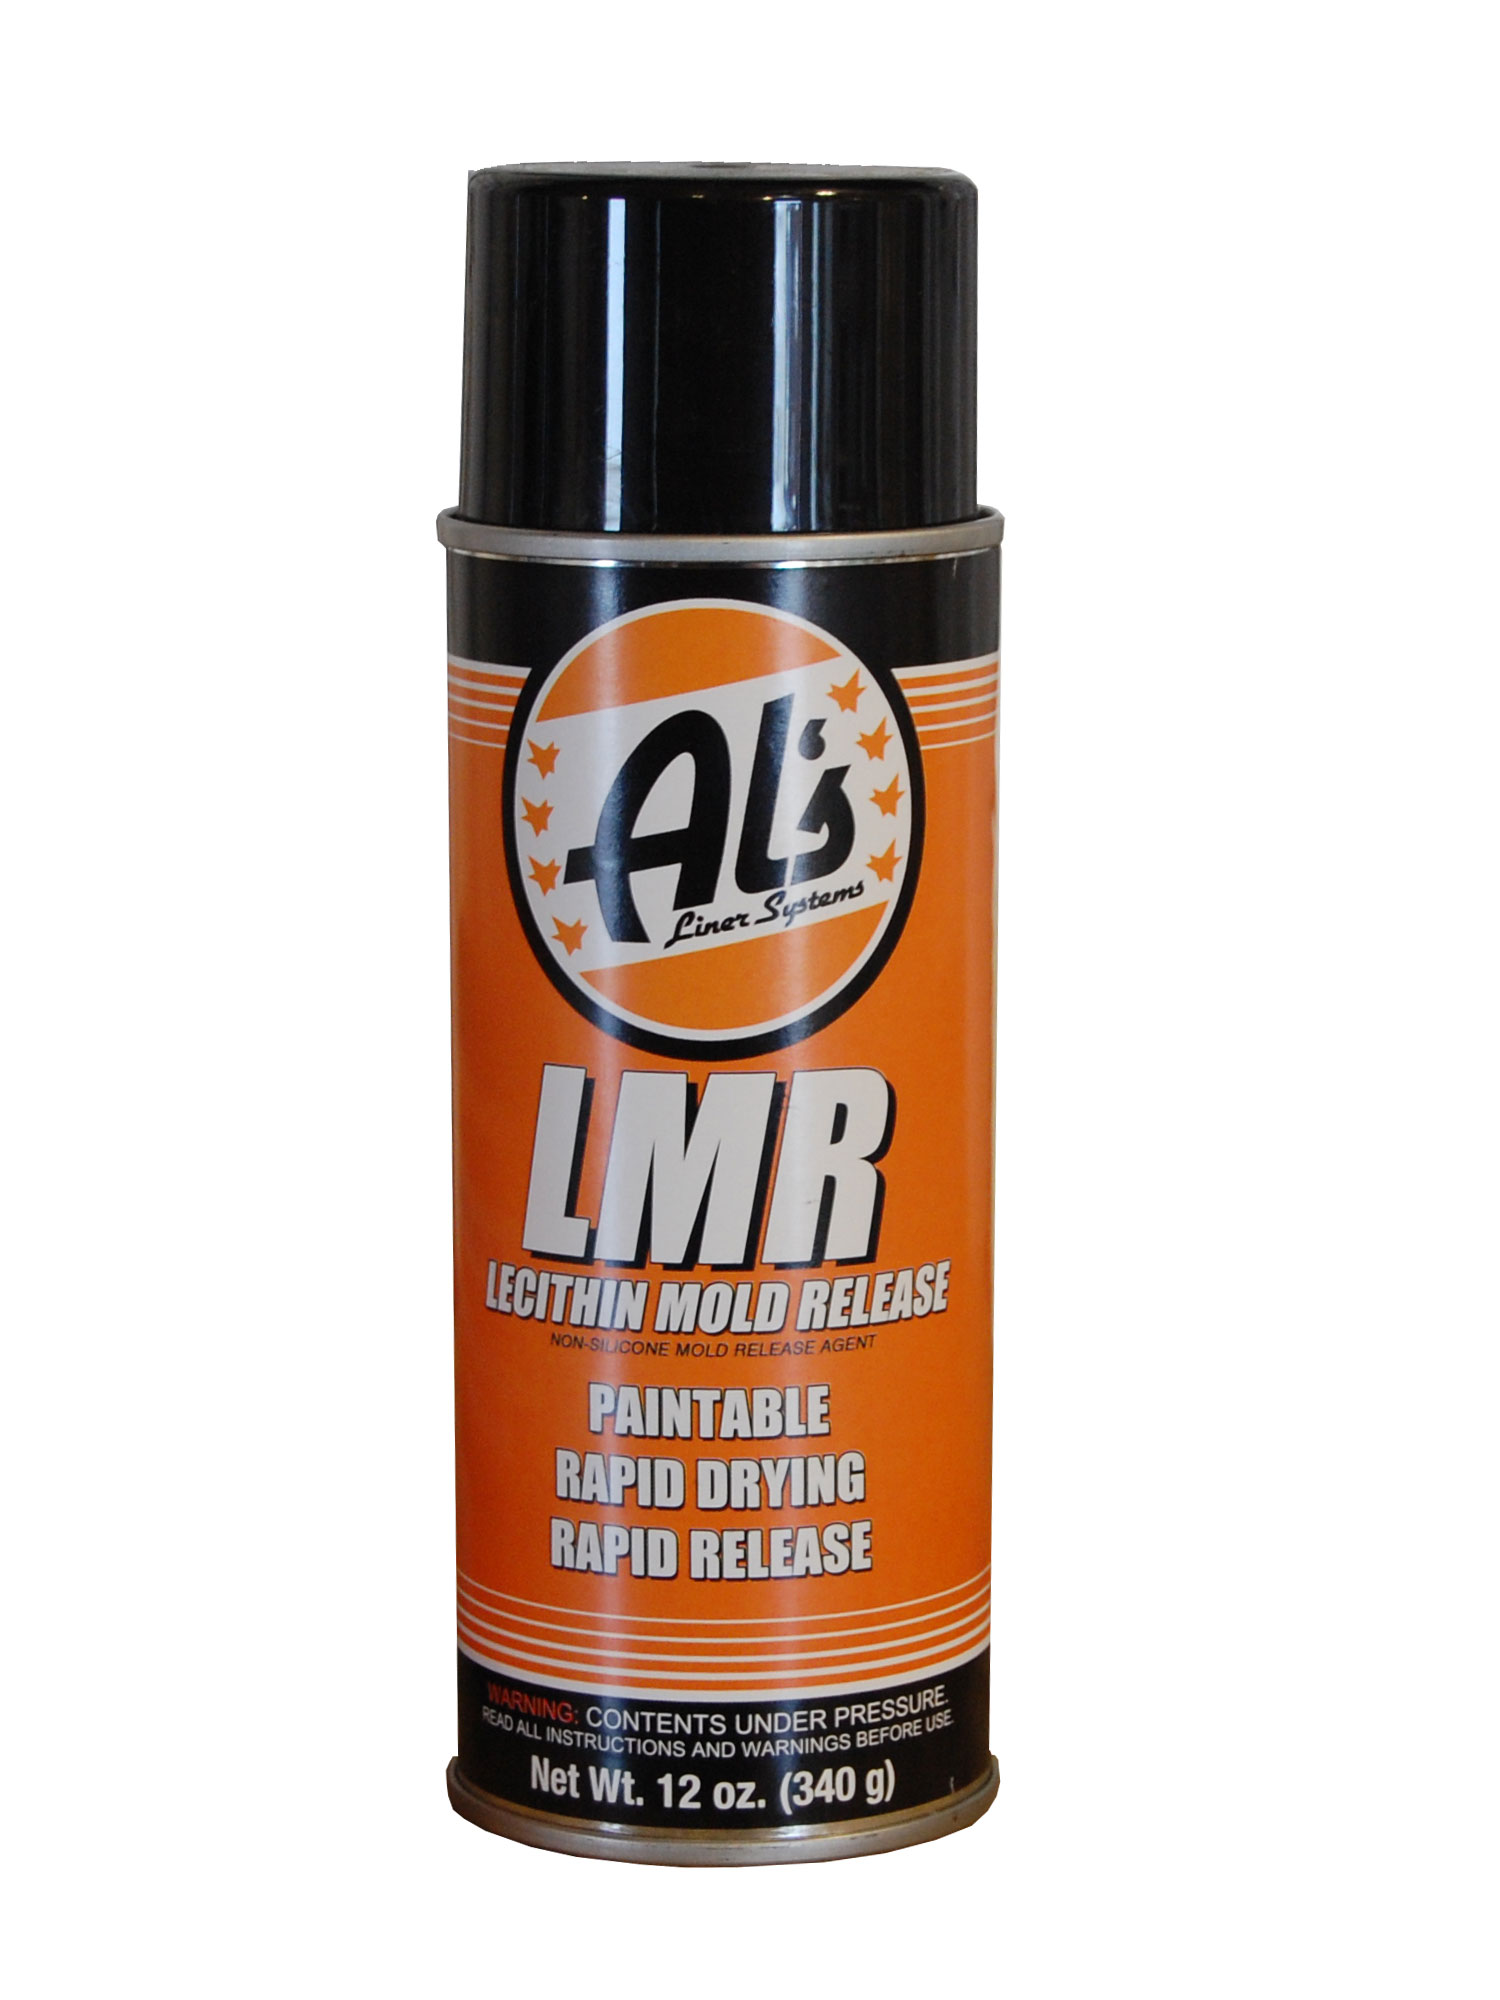 Lecithin Mold Release (Spray Gun Cleaning Aid) - Al's Liner